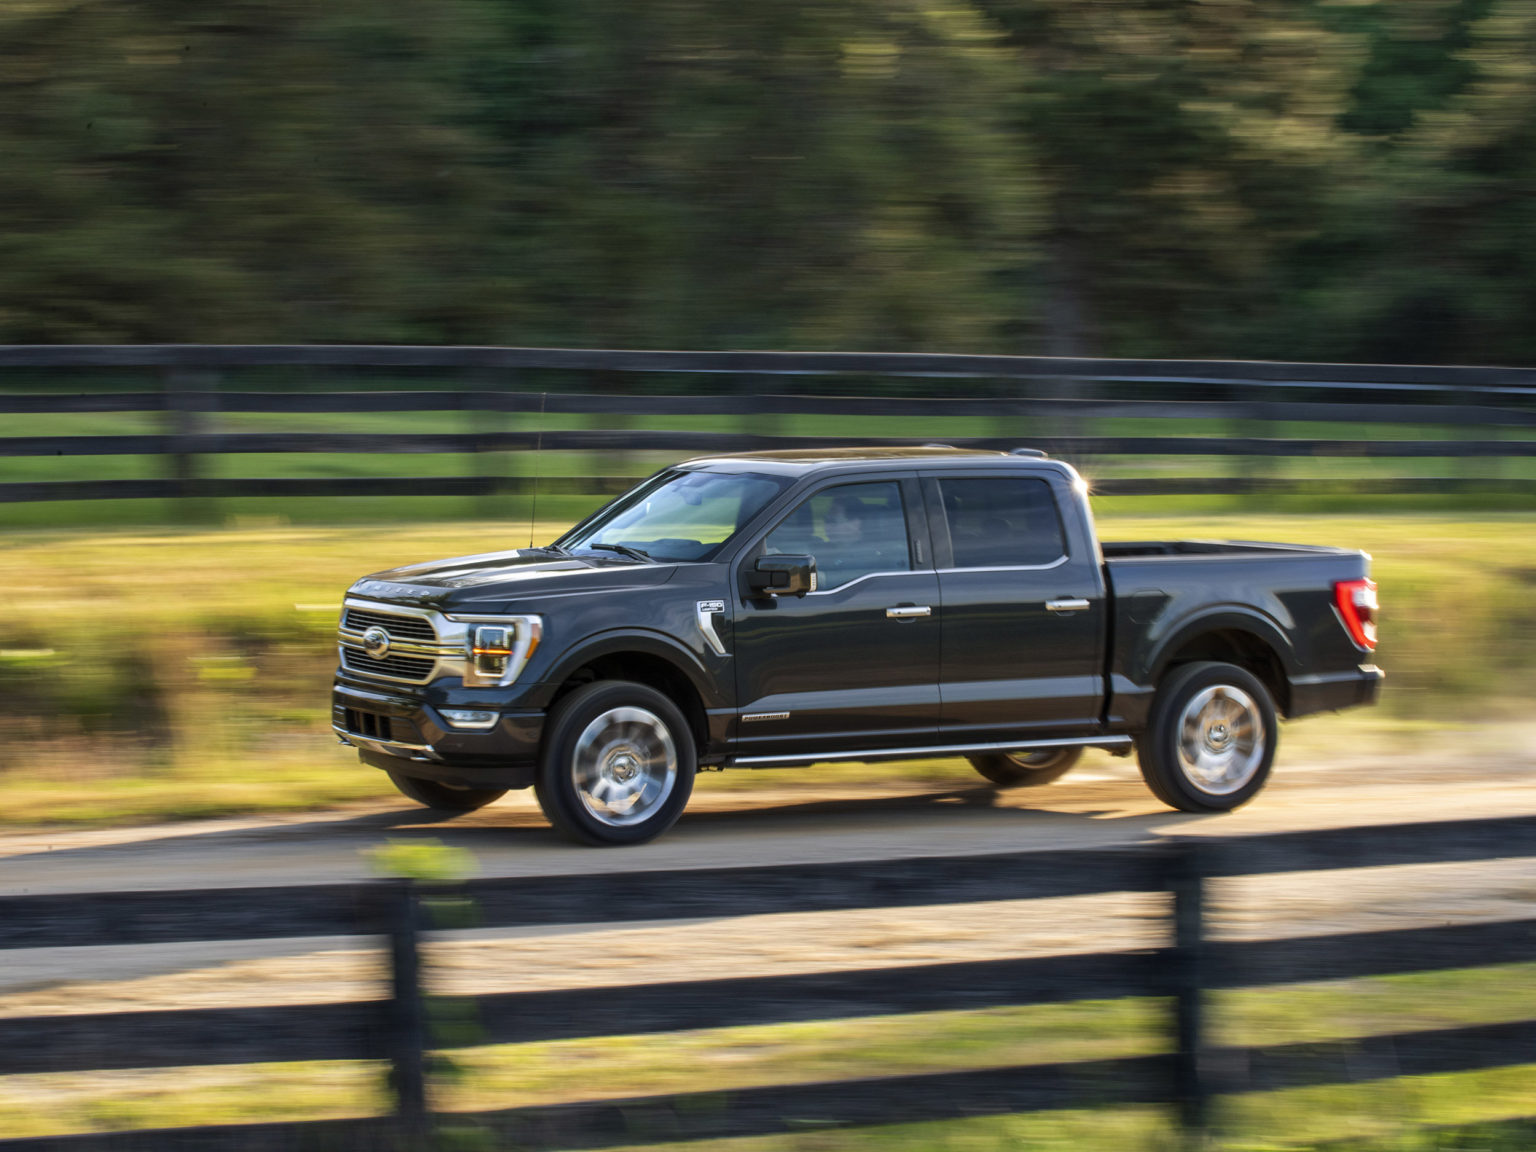 The 2021 Ford F-150 will be avaiblle with Ford's new hands-free driving technology.